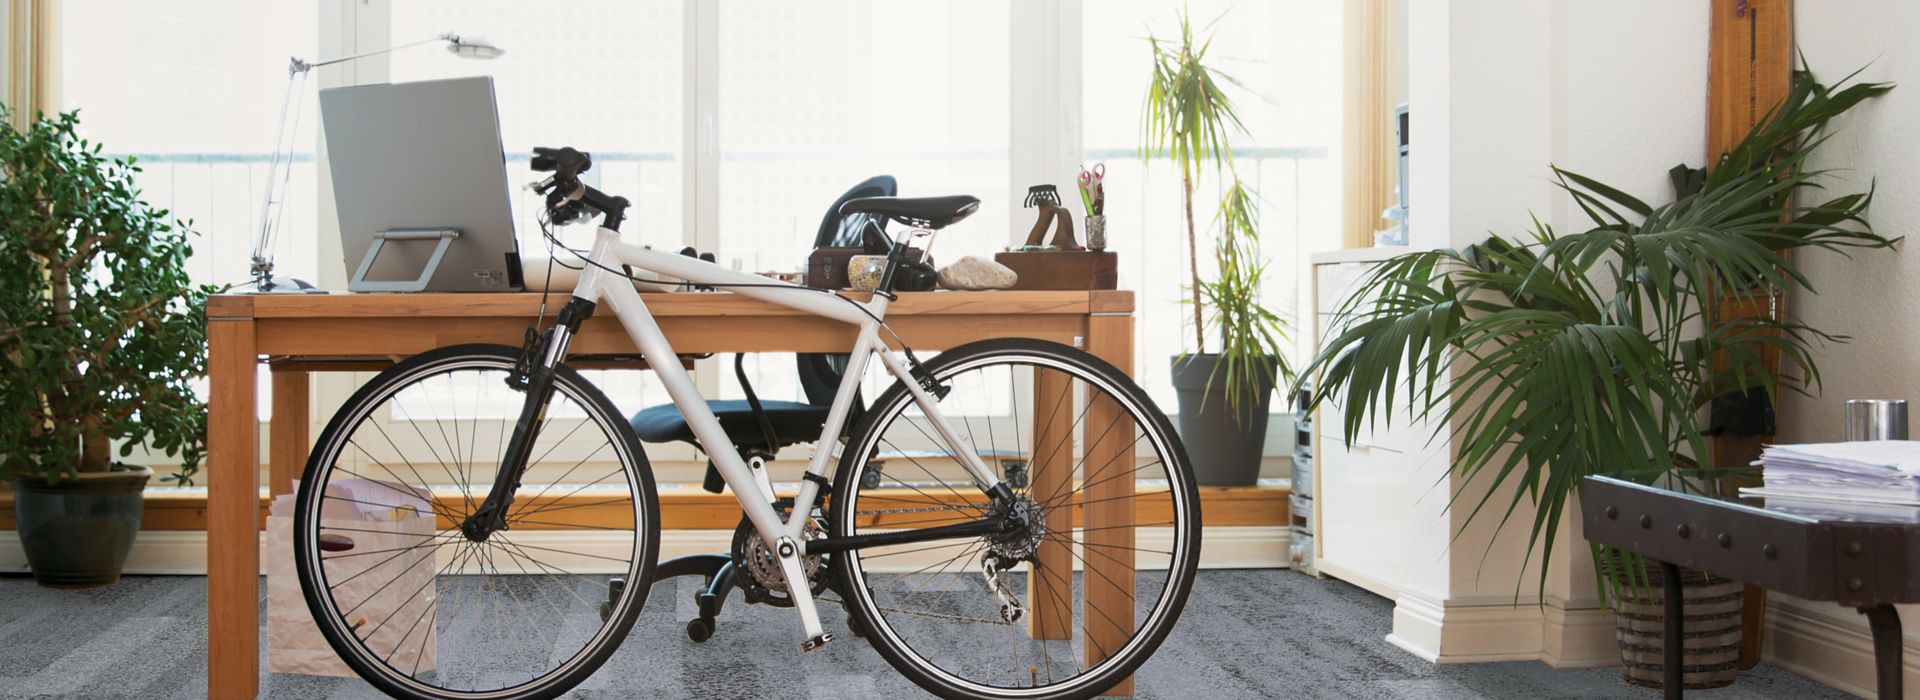 Interface Nature's Course plank carpet tile in private office with desk and bike